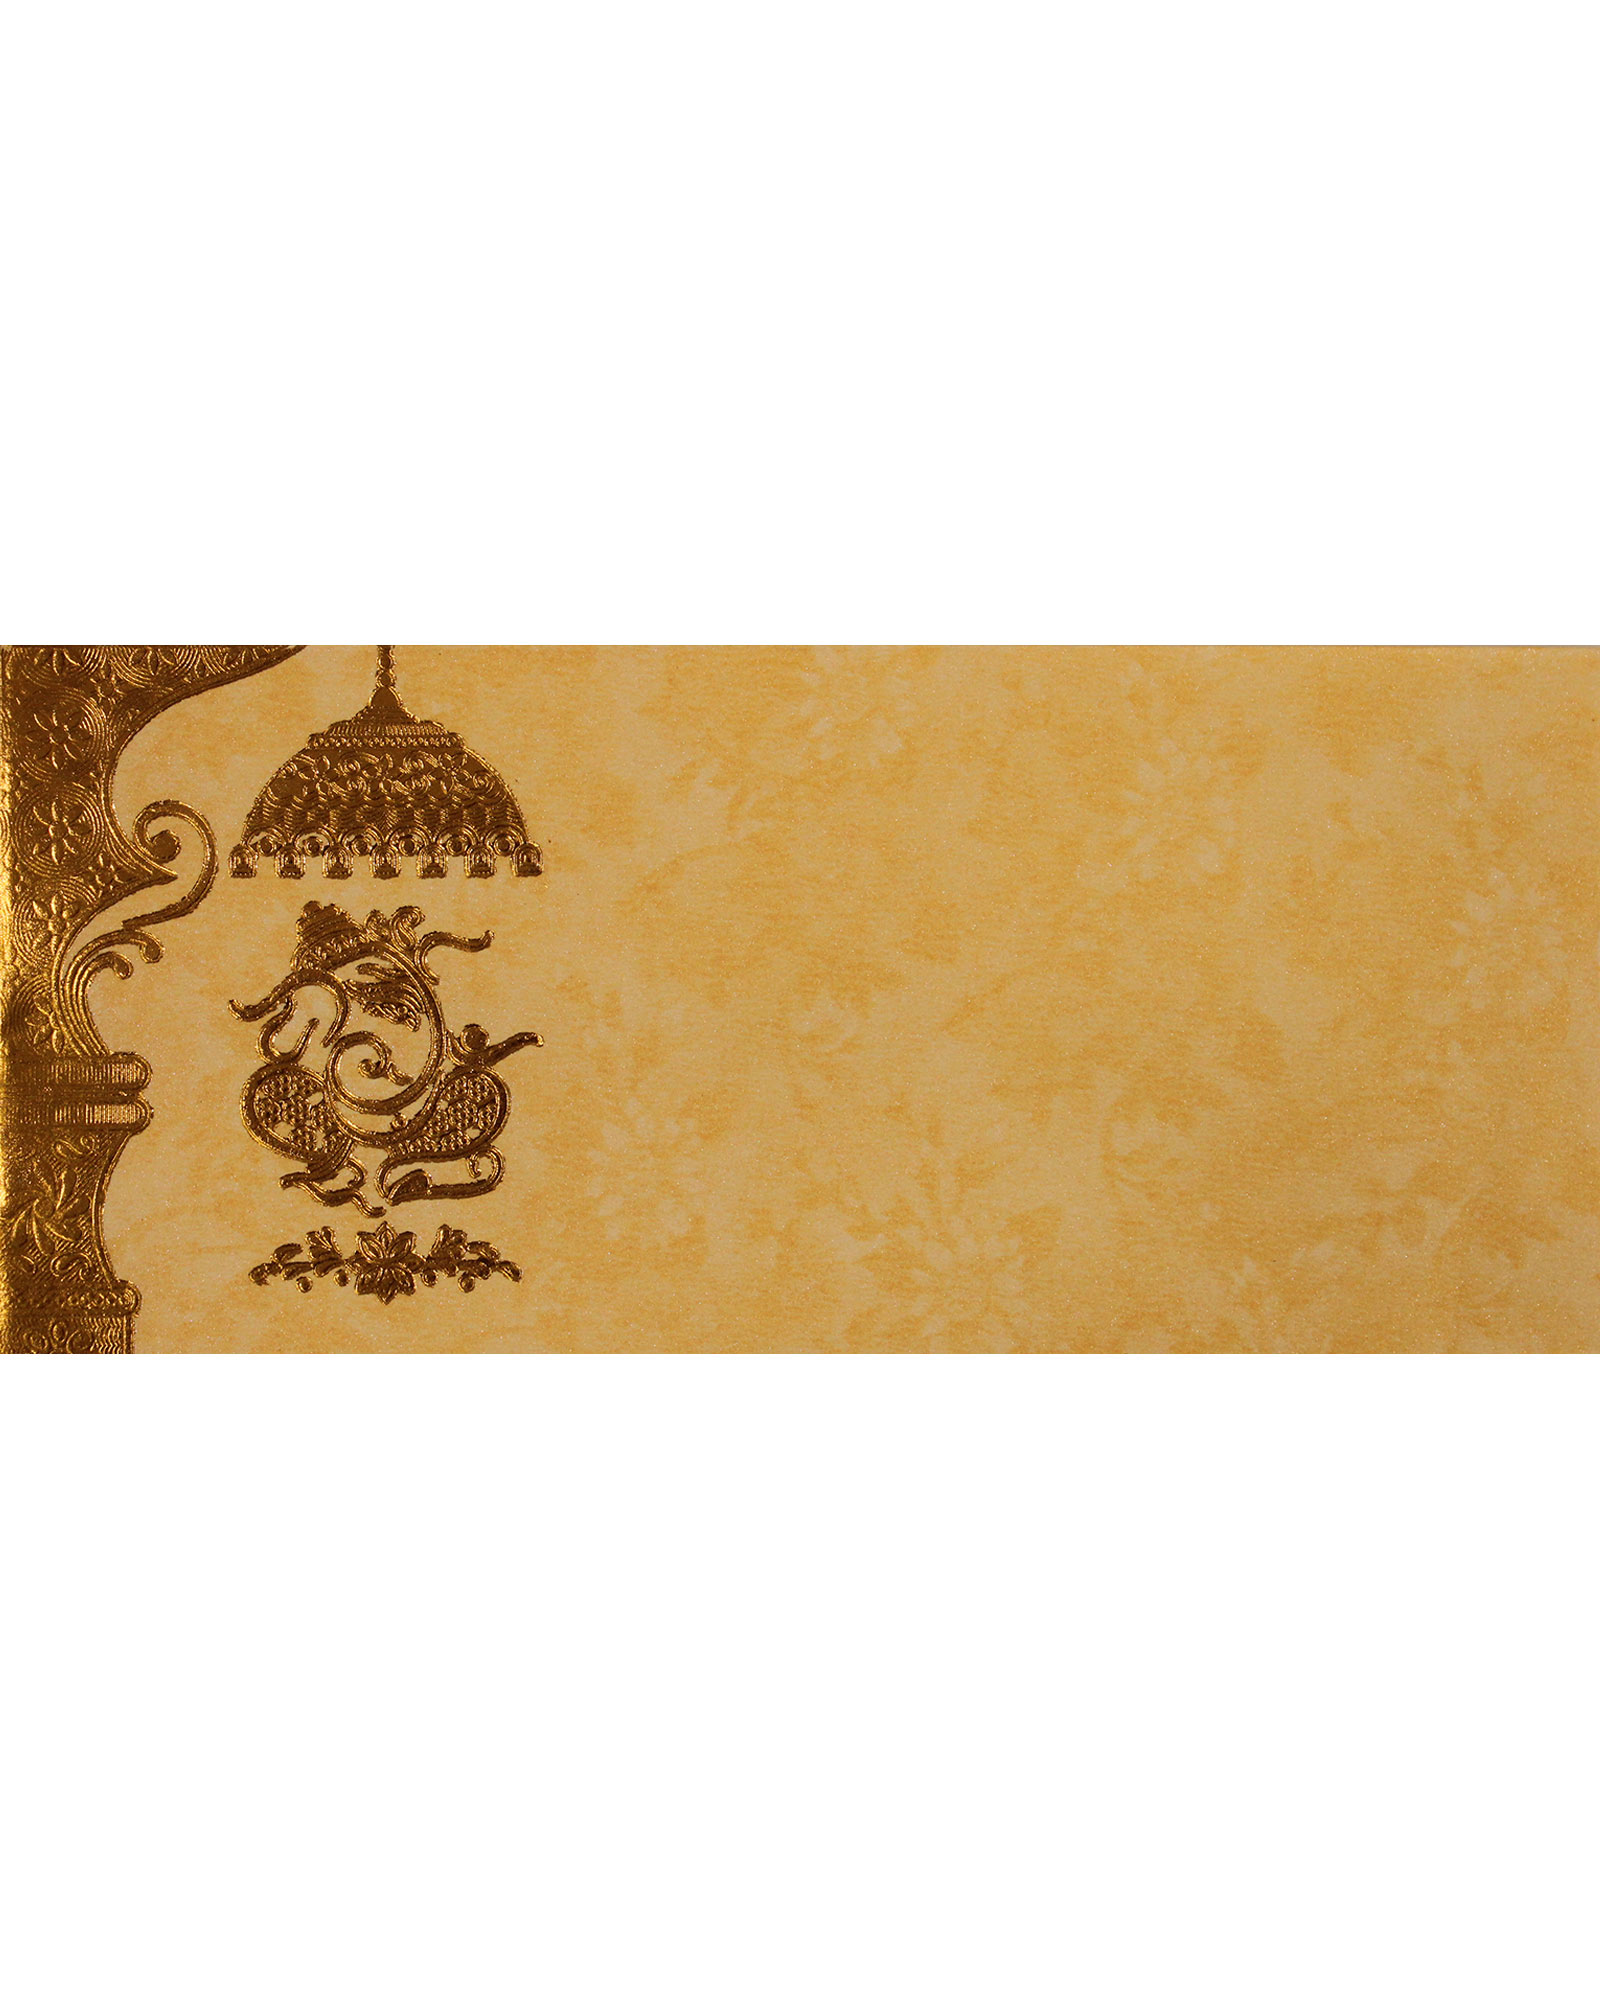 Gift Envelope with Waving Flower Theme in Rich Gold - Lotus Card Studio